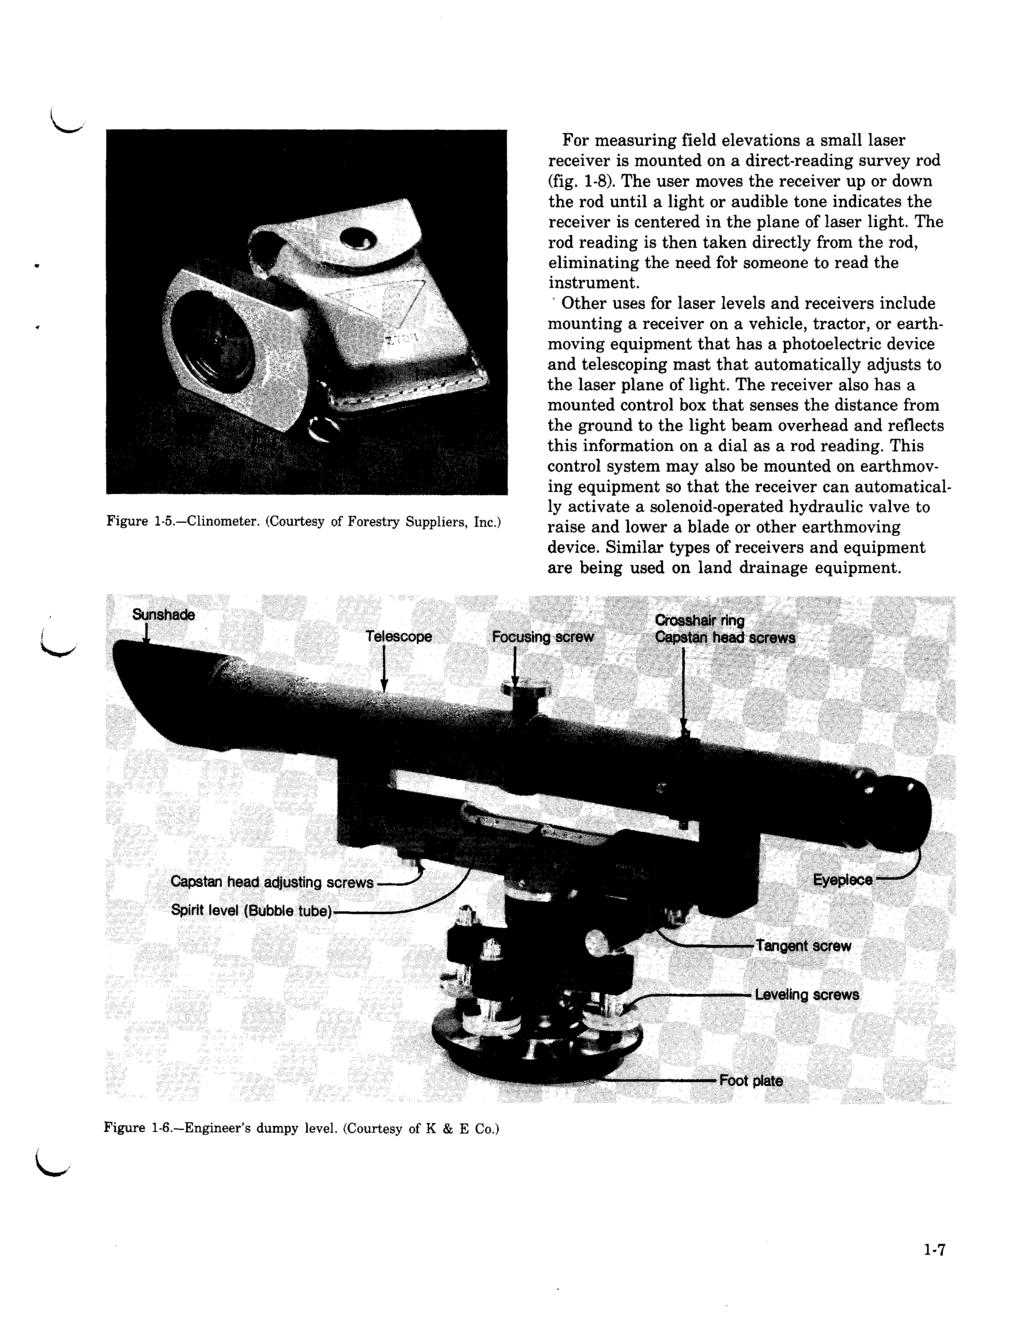 Figure 1-5.-Clinometer. (Courtesy of Forestry Suppliers, Inc.) For measuring field elevations a small laser receiver is mounted on a direct-reading survey rod (fig. 1-8).